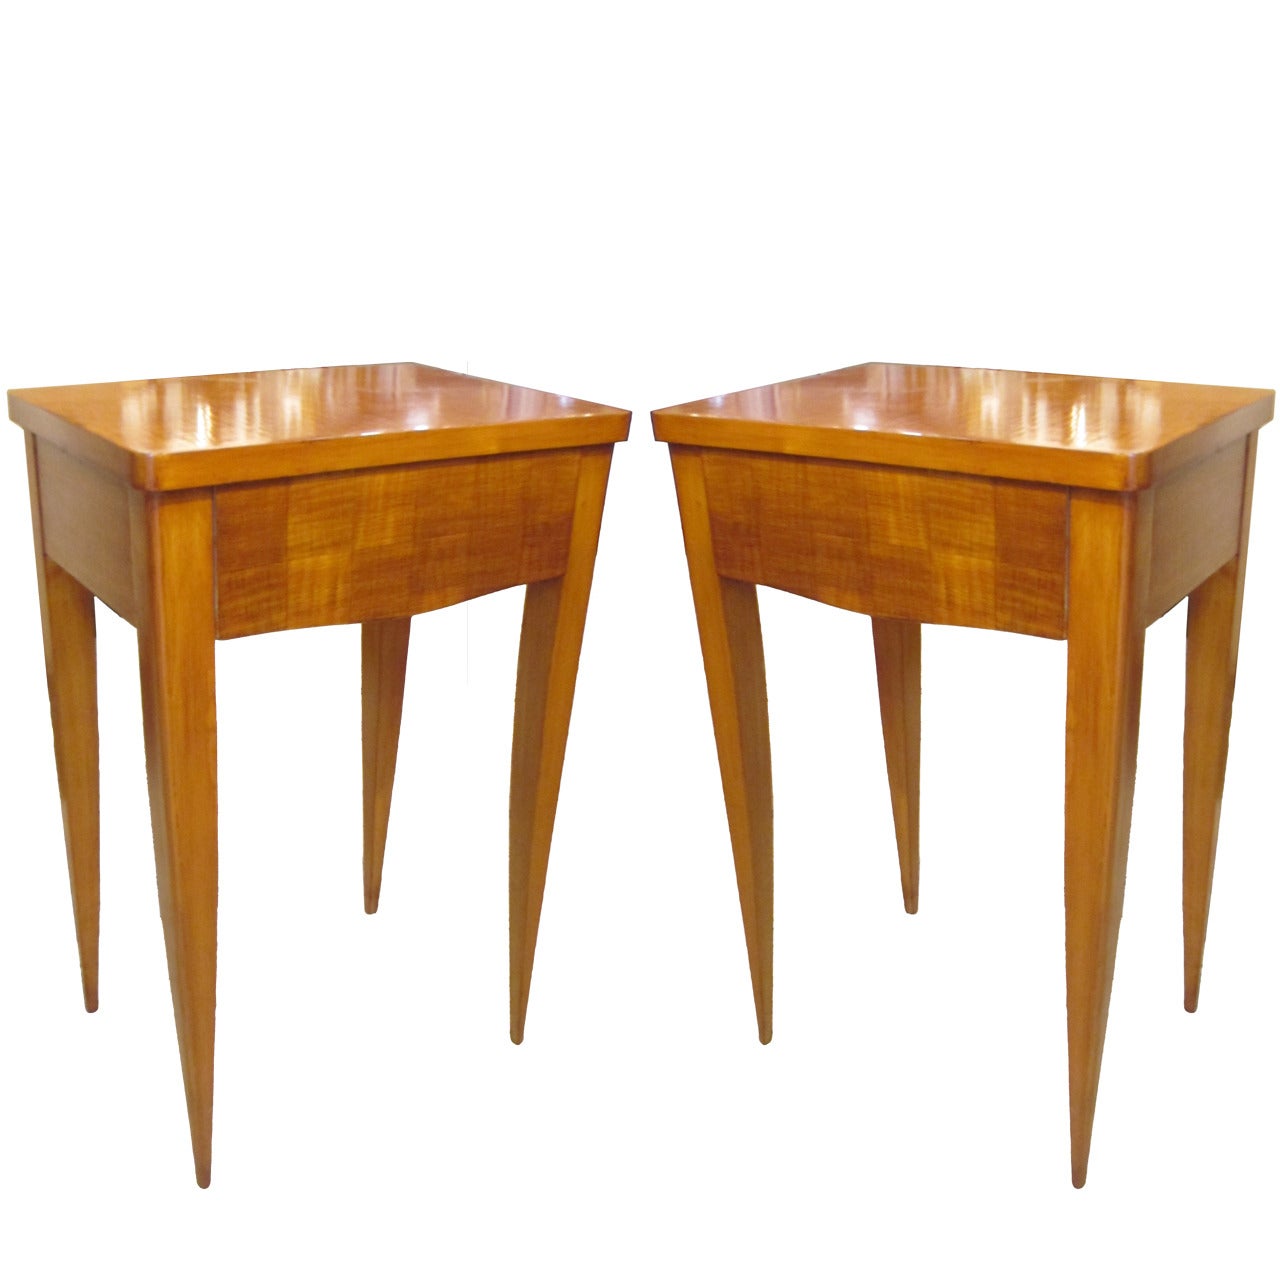 Pair of French Modernist Parquetry End Tables